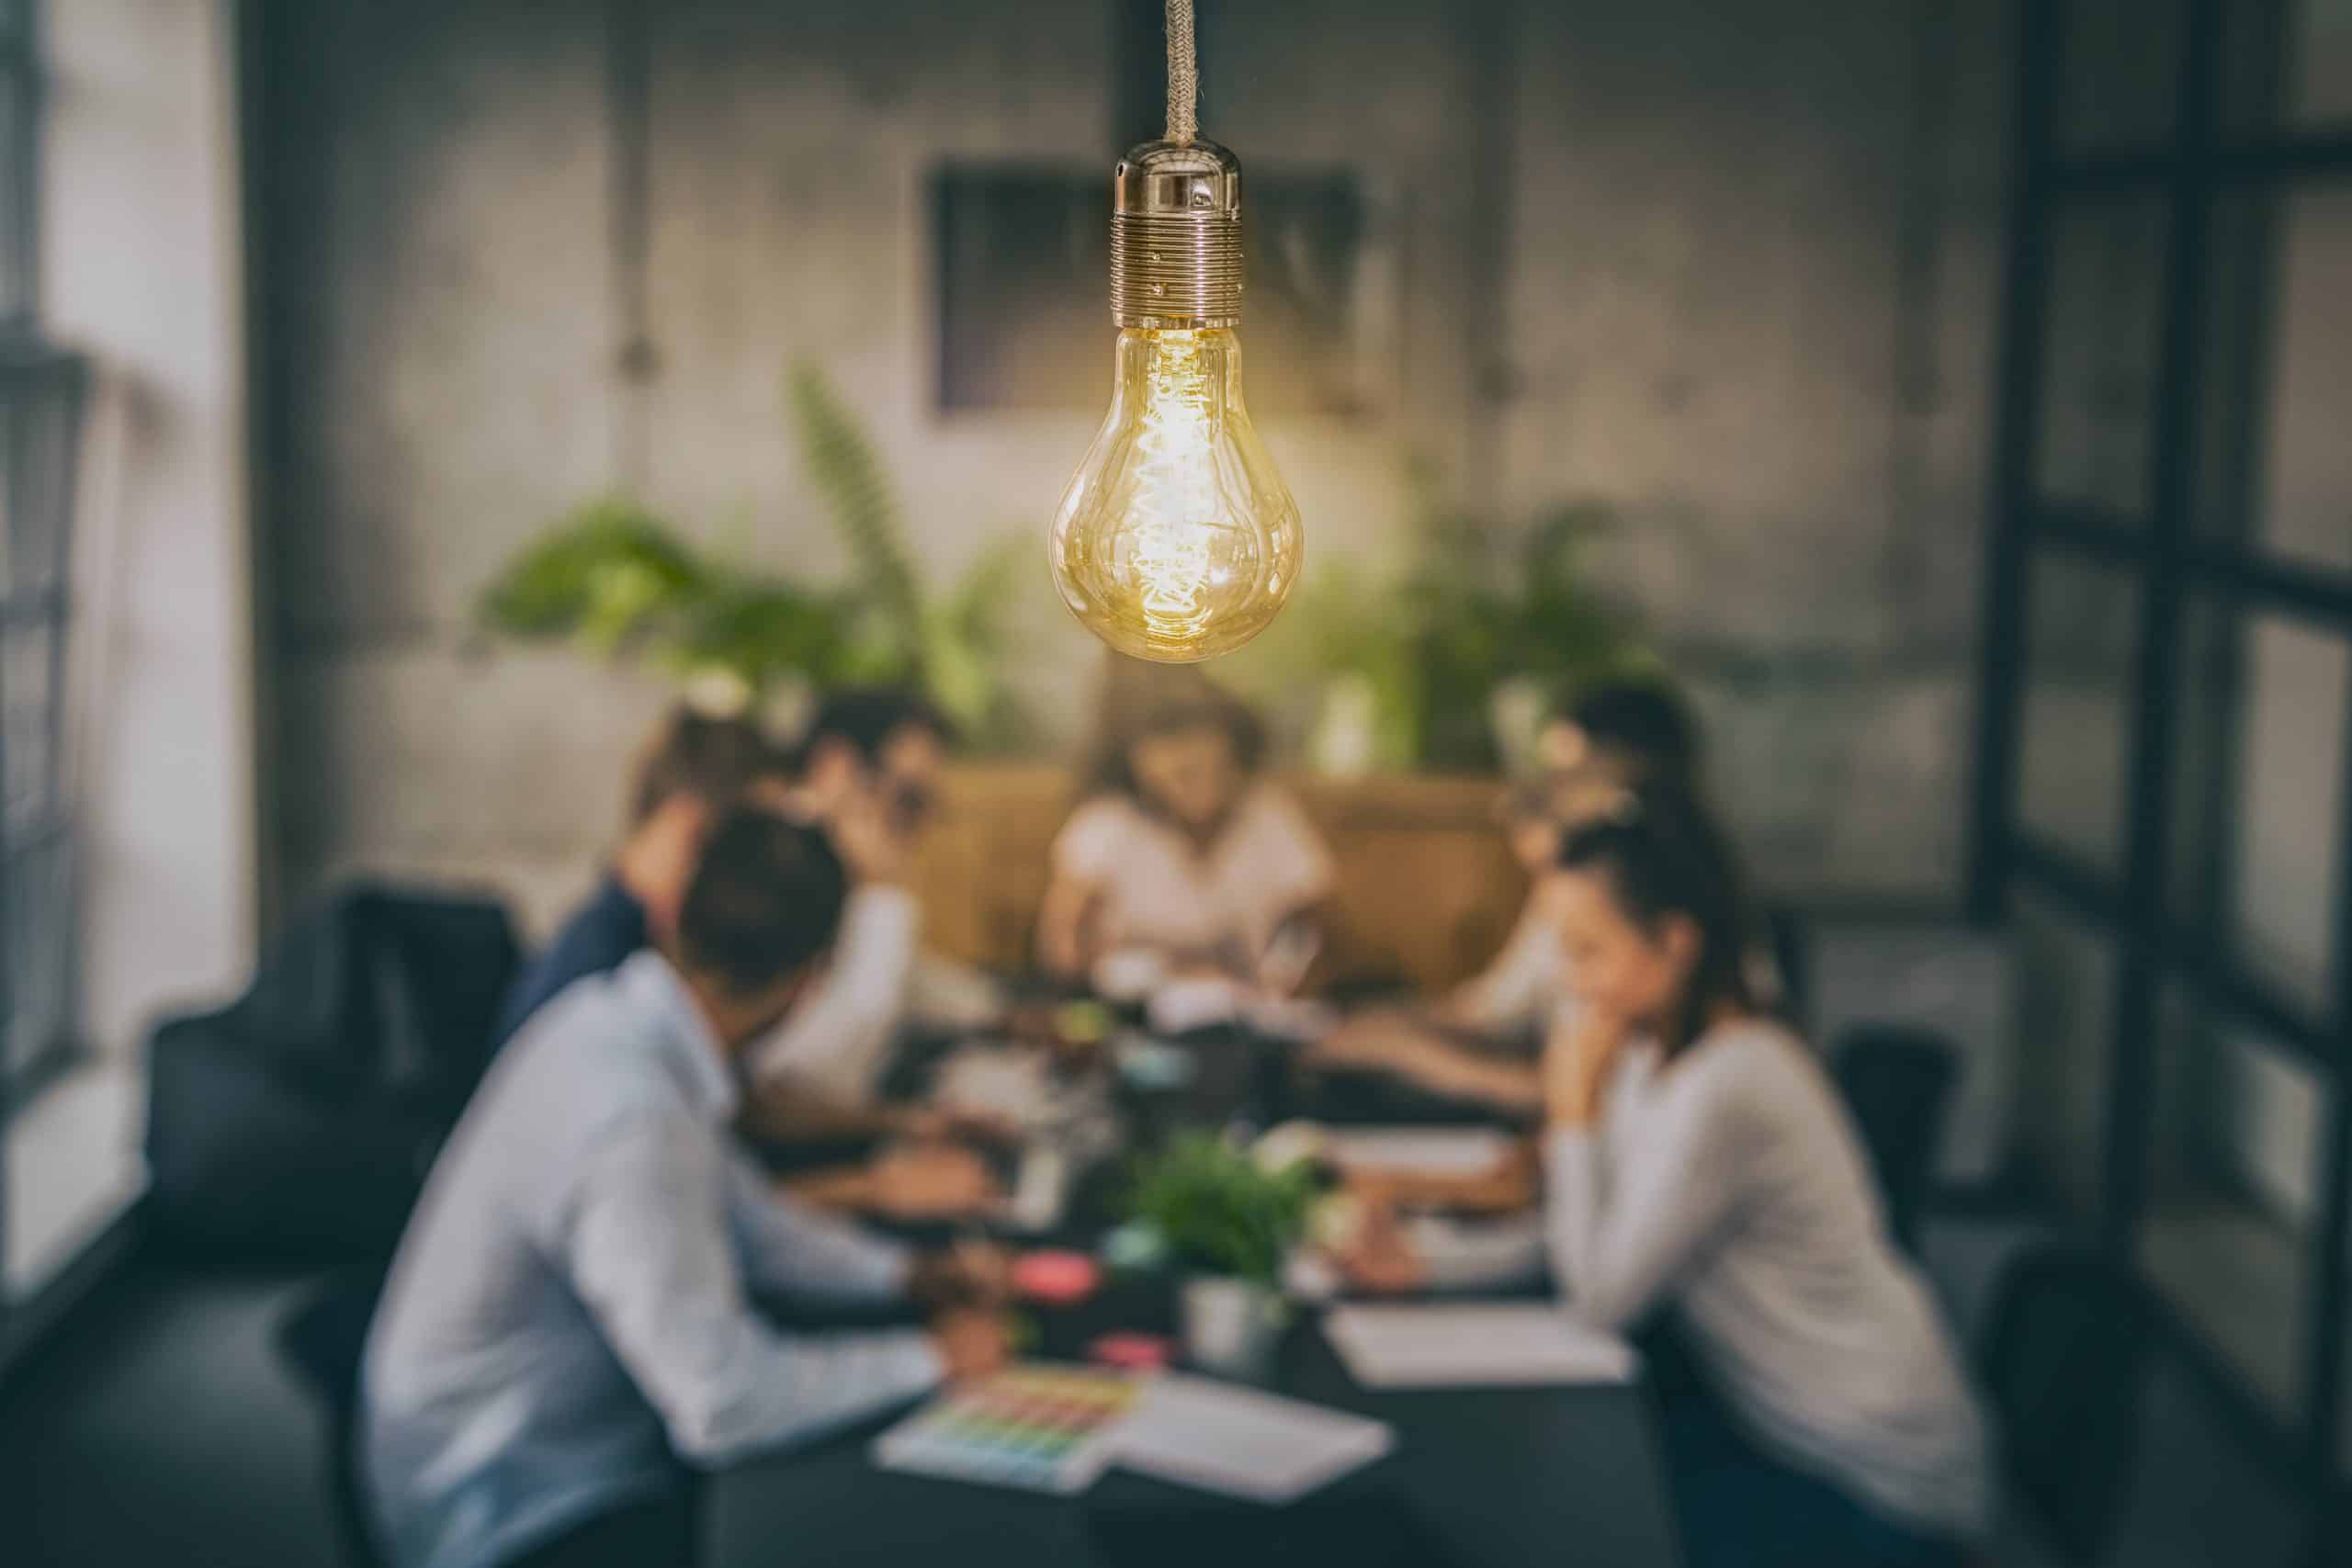 Group of young business people out of focus in the background look excited while meeting together. A glowing light bulb as a new idea is in focus in the foreground.